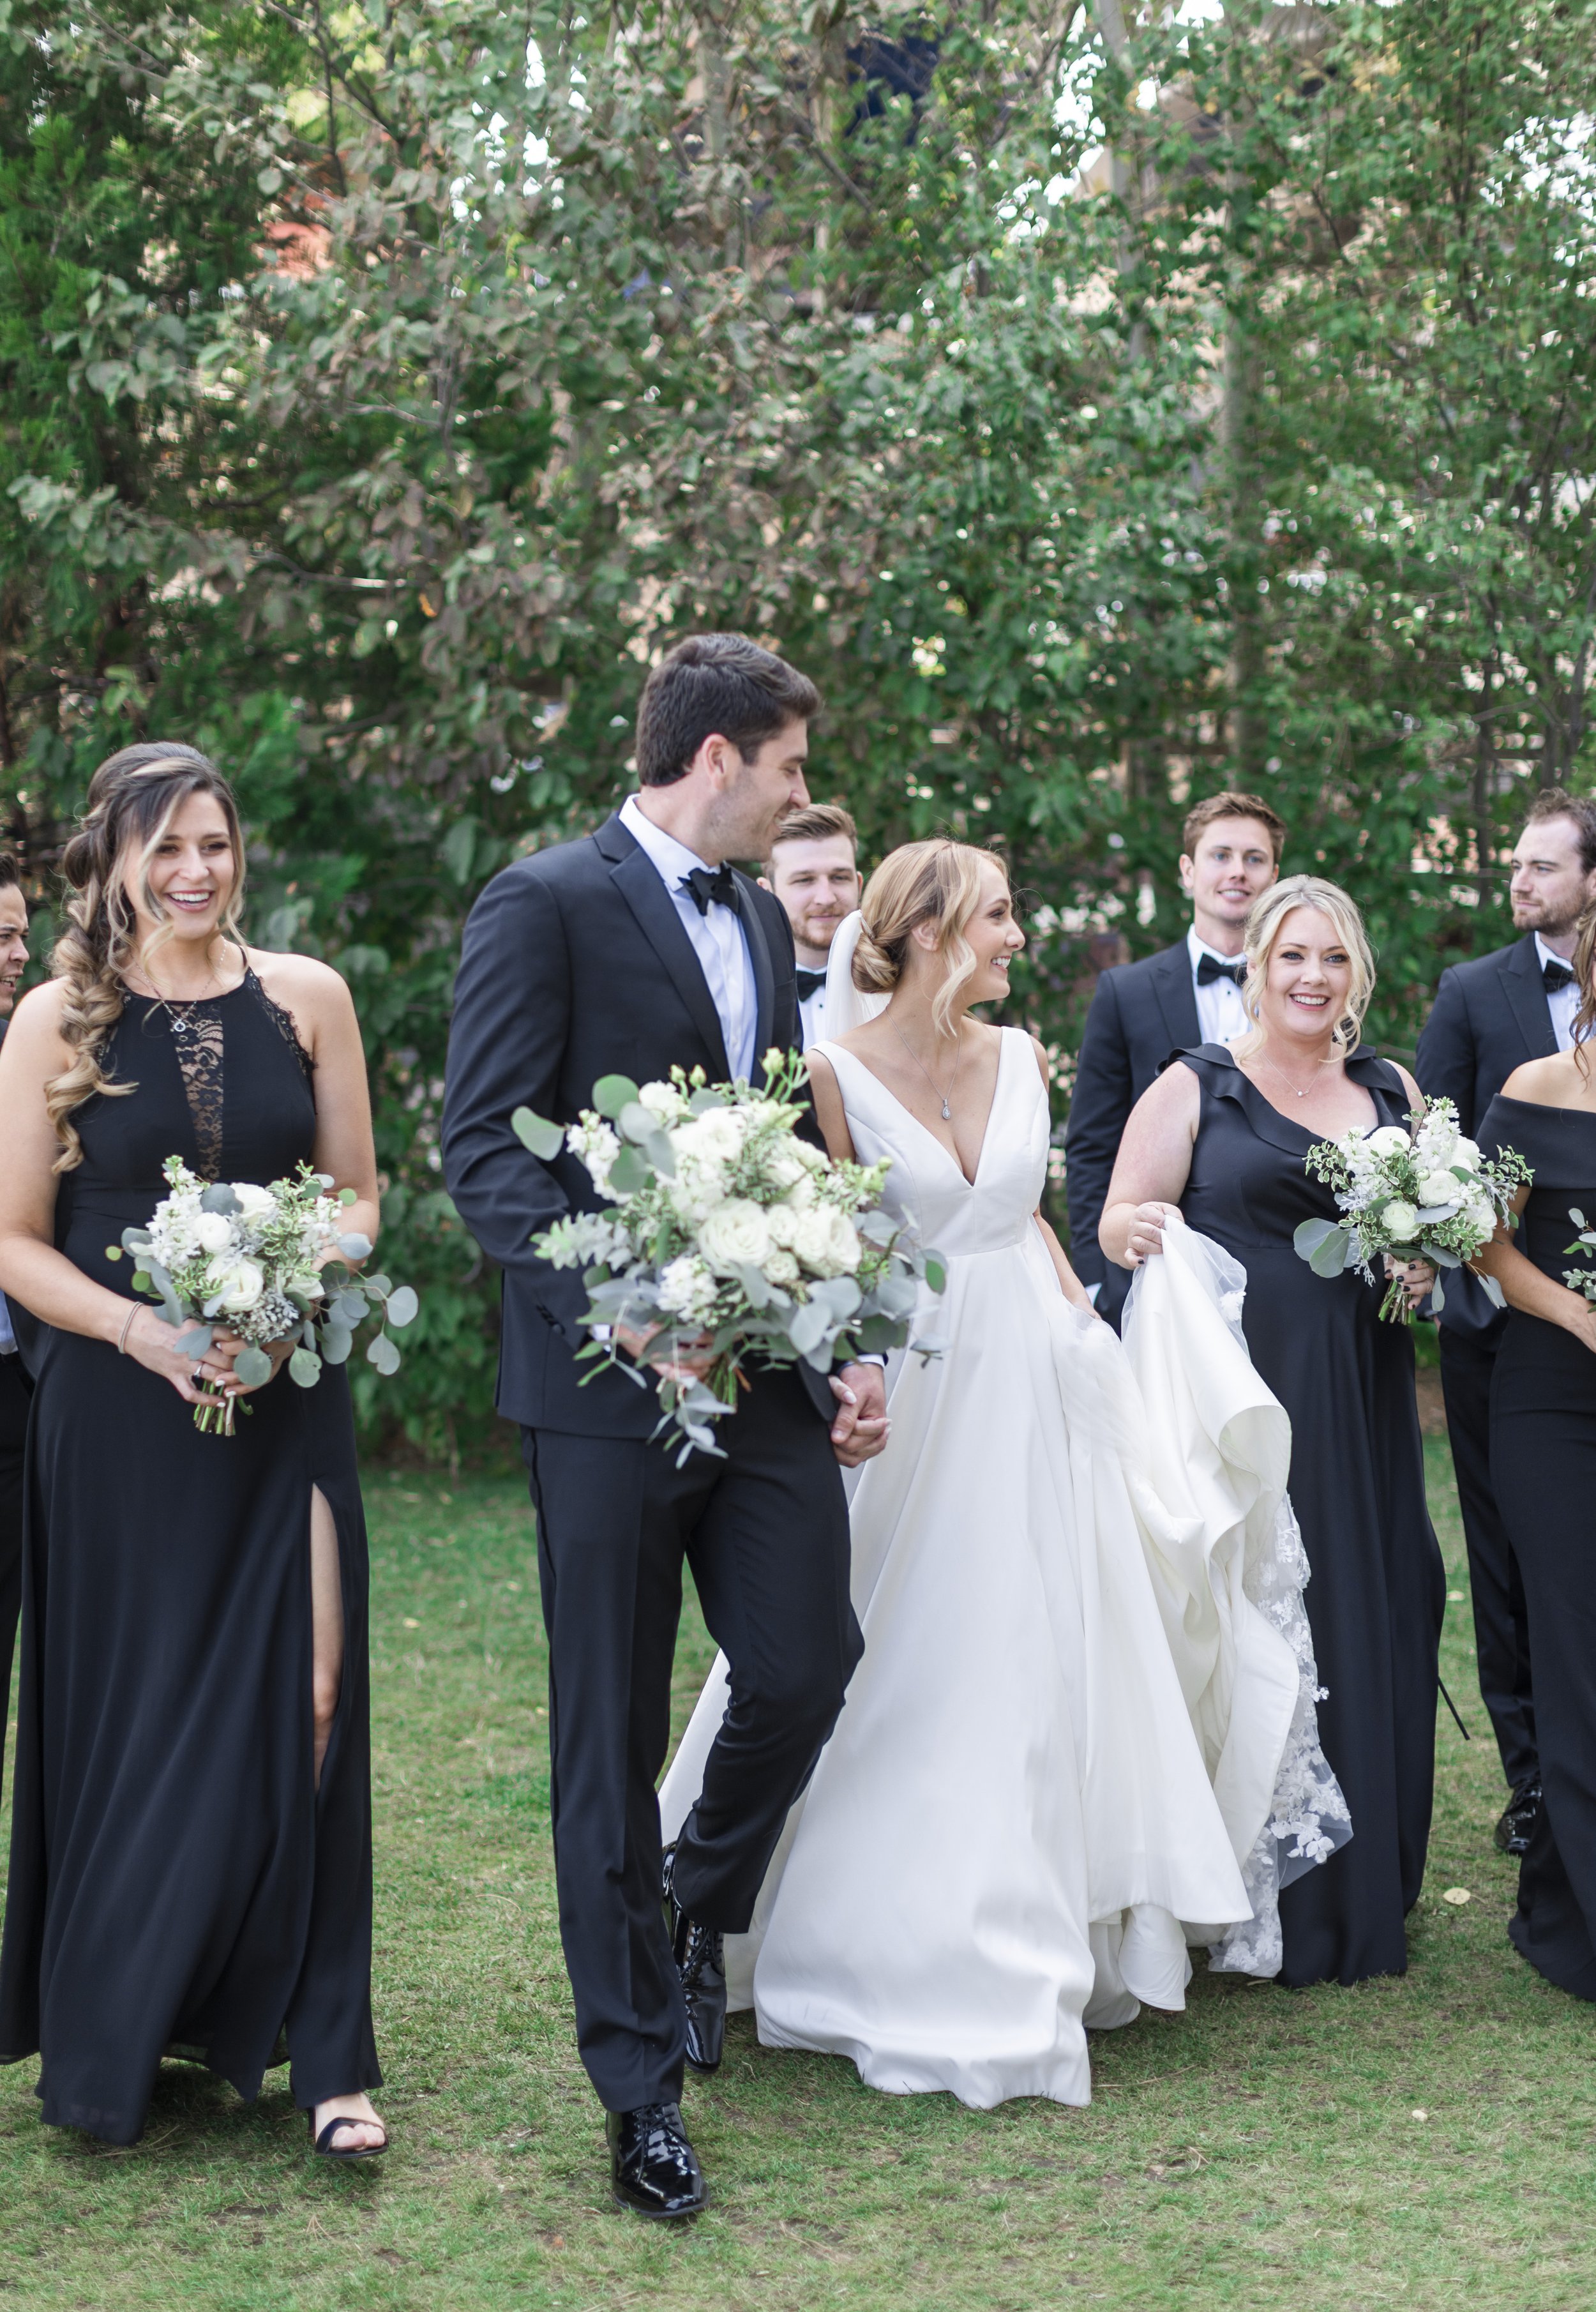  A bridal party all wearing black during an outdoor wedding captured by Savanna Richardson Photography. bridal party in black v-neck wedding gown #savannarichardsonphotography #tahoewedding #lakesidewedding #outdoorwedding #summerwedding #laketahoe 